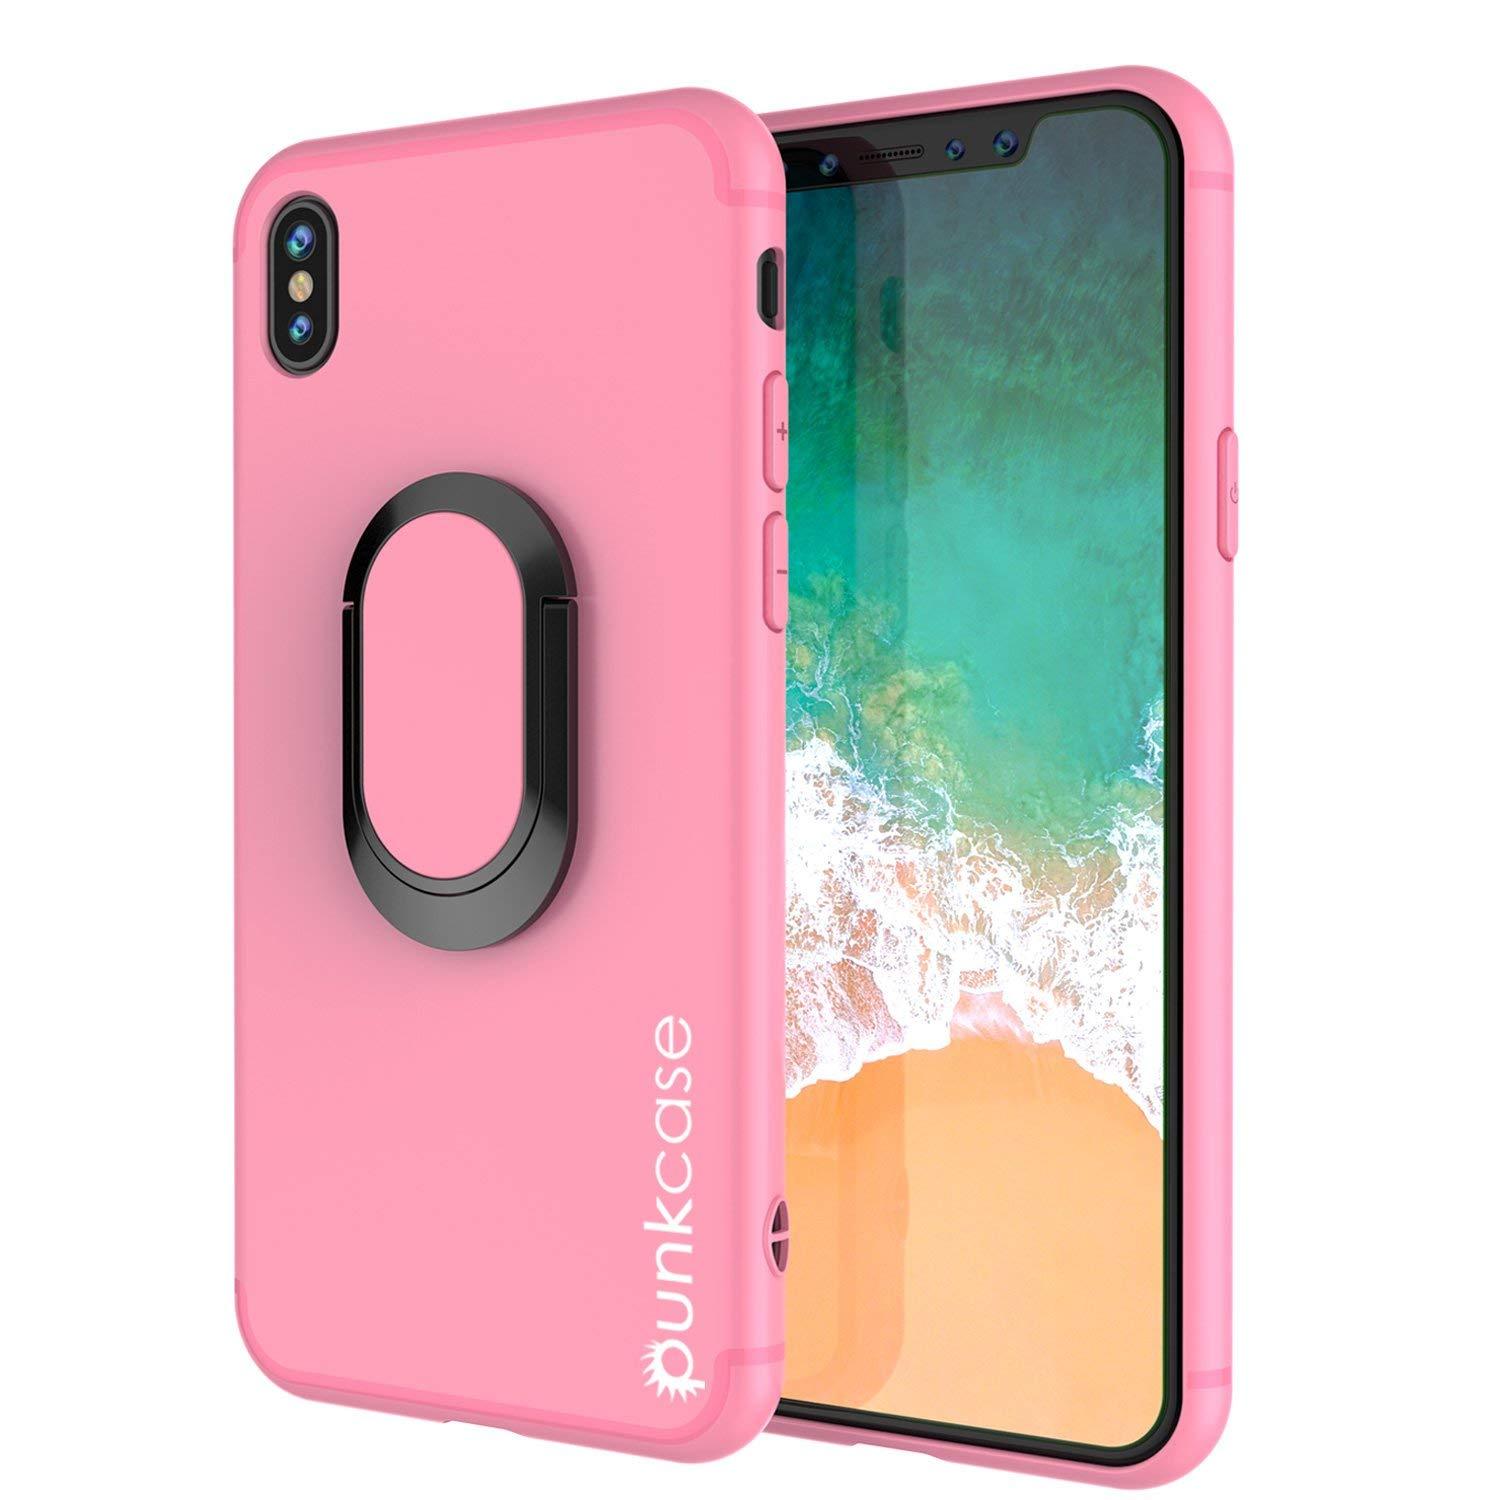 iPhone XR Case, Punkcase Magnetix Protective TPU Cover W/ Kickstand, Tempered Glass Screen Protector [Pink] - PunkCase NZ